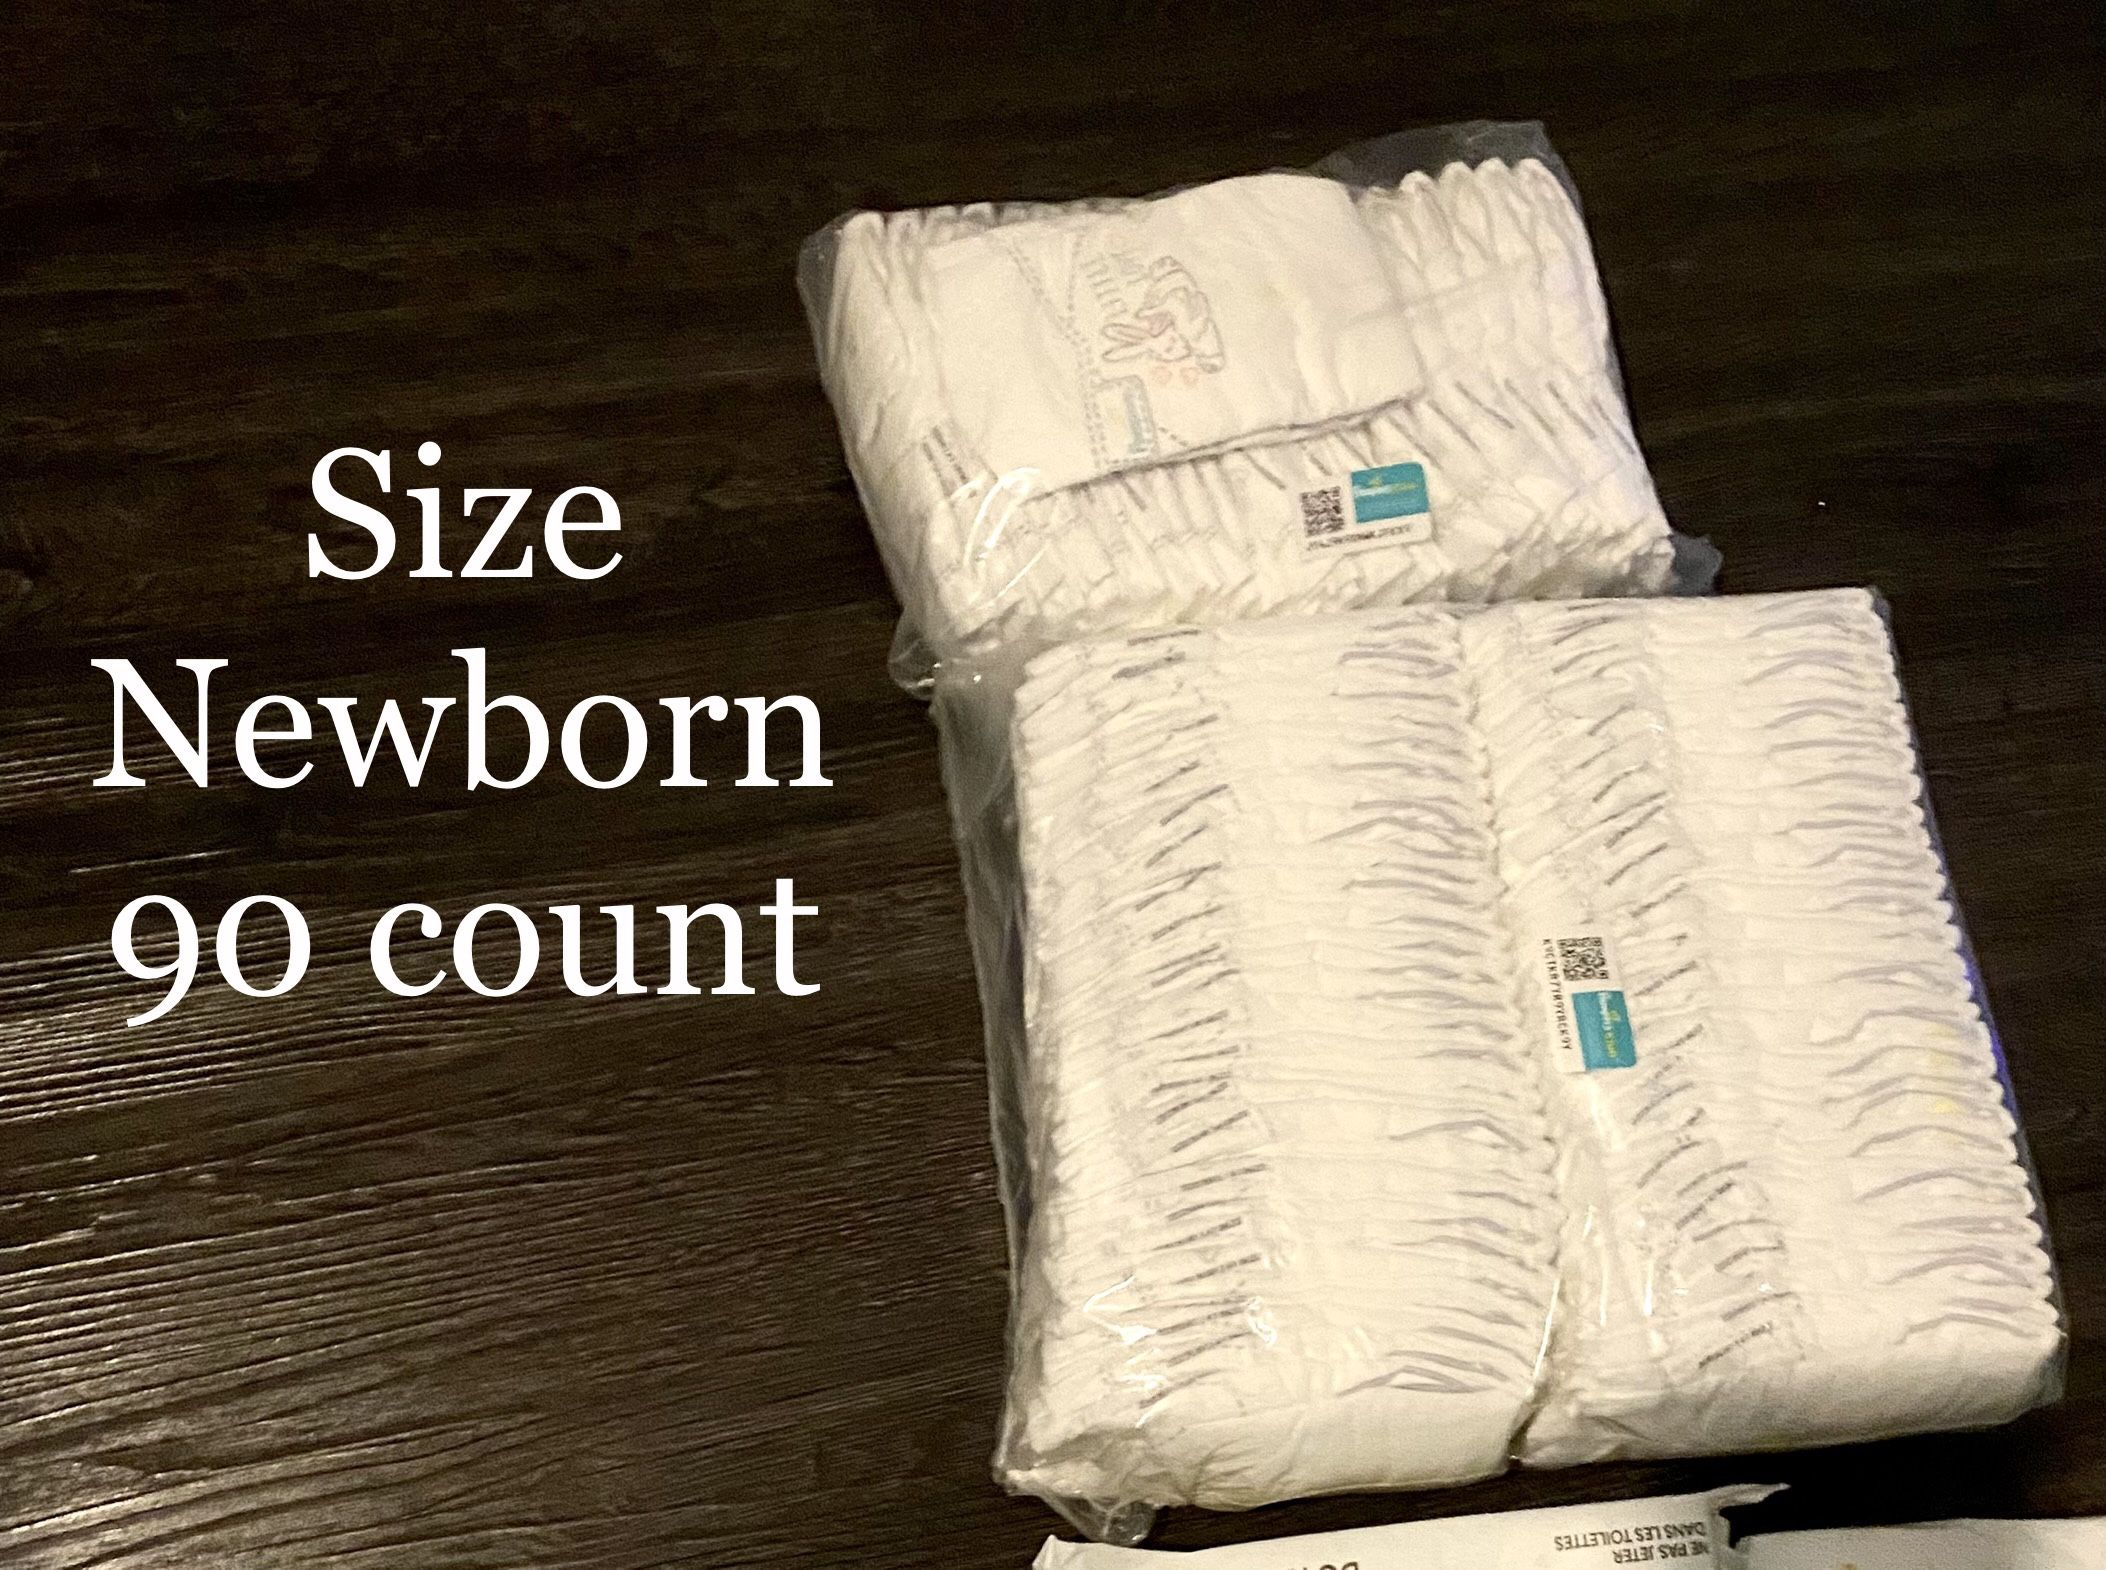 Baby Diapers & Wipes